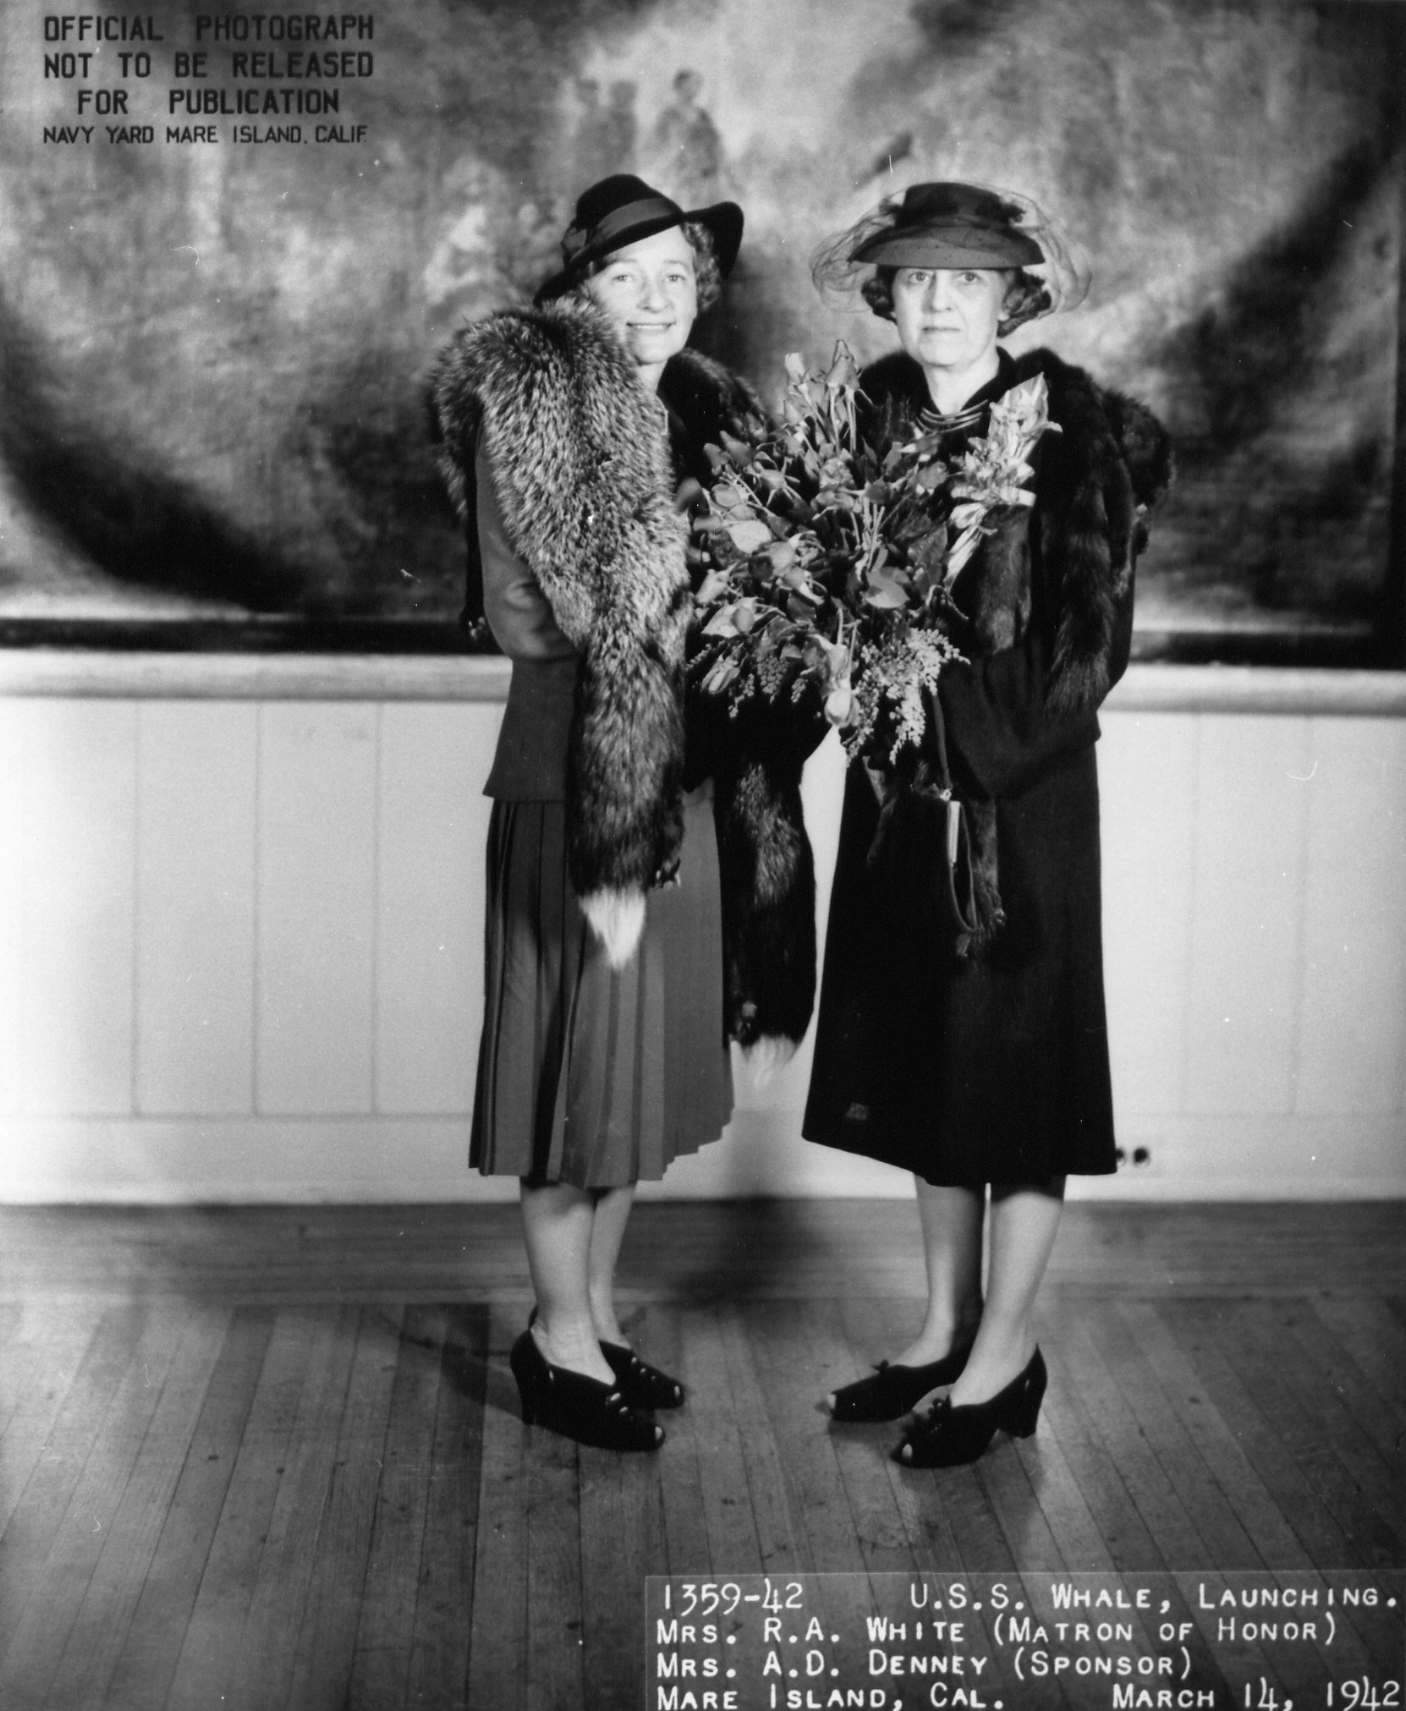 Mrs. R. A. White (Matron of Honor) and Mrs. A. D. Denney (Sponsor) at the launching of submarine Whale, Mare Island Navy Yard, Vallejo, California, United States, 14 Mar 1942